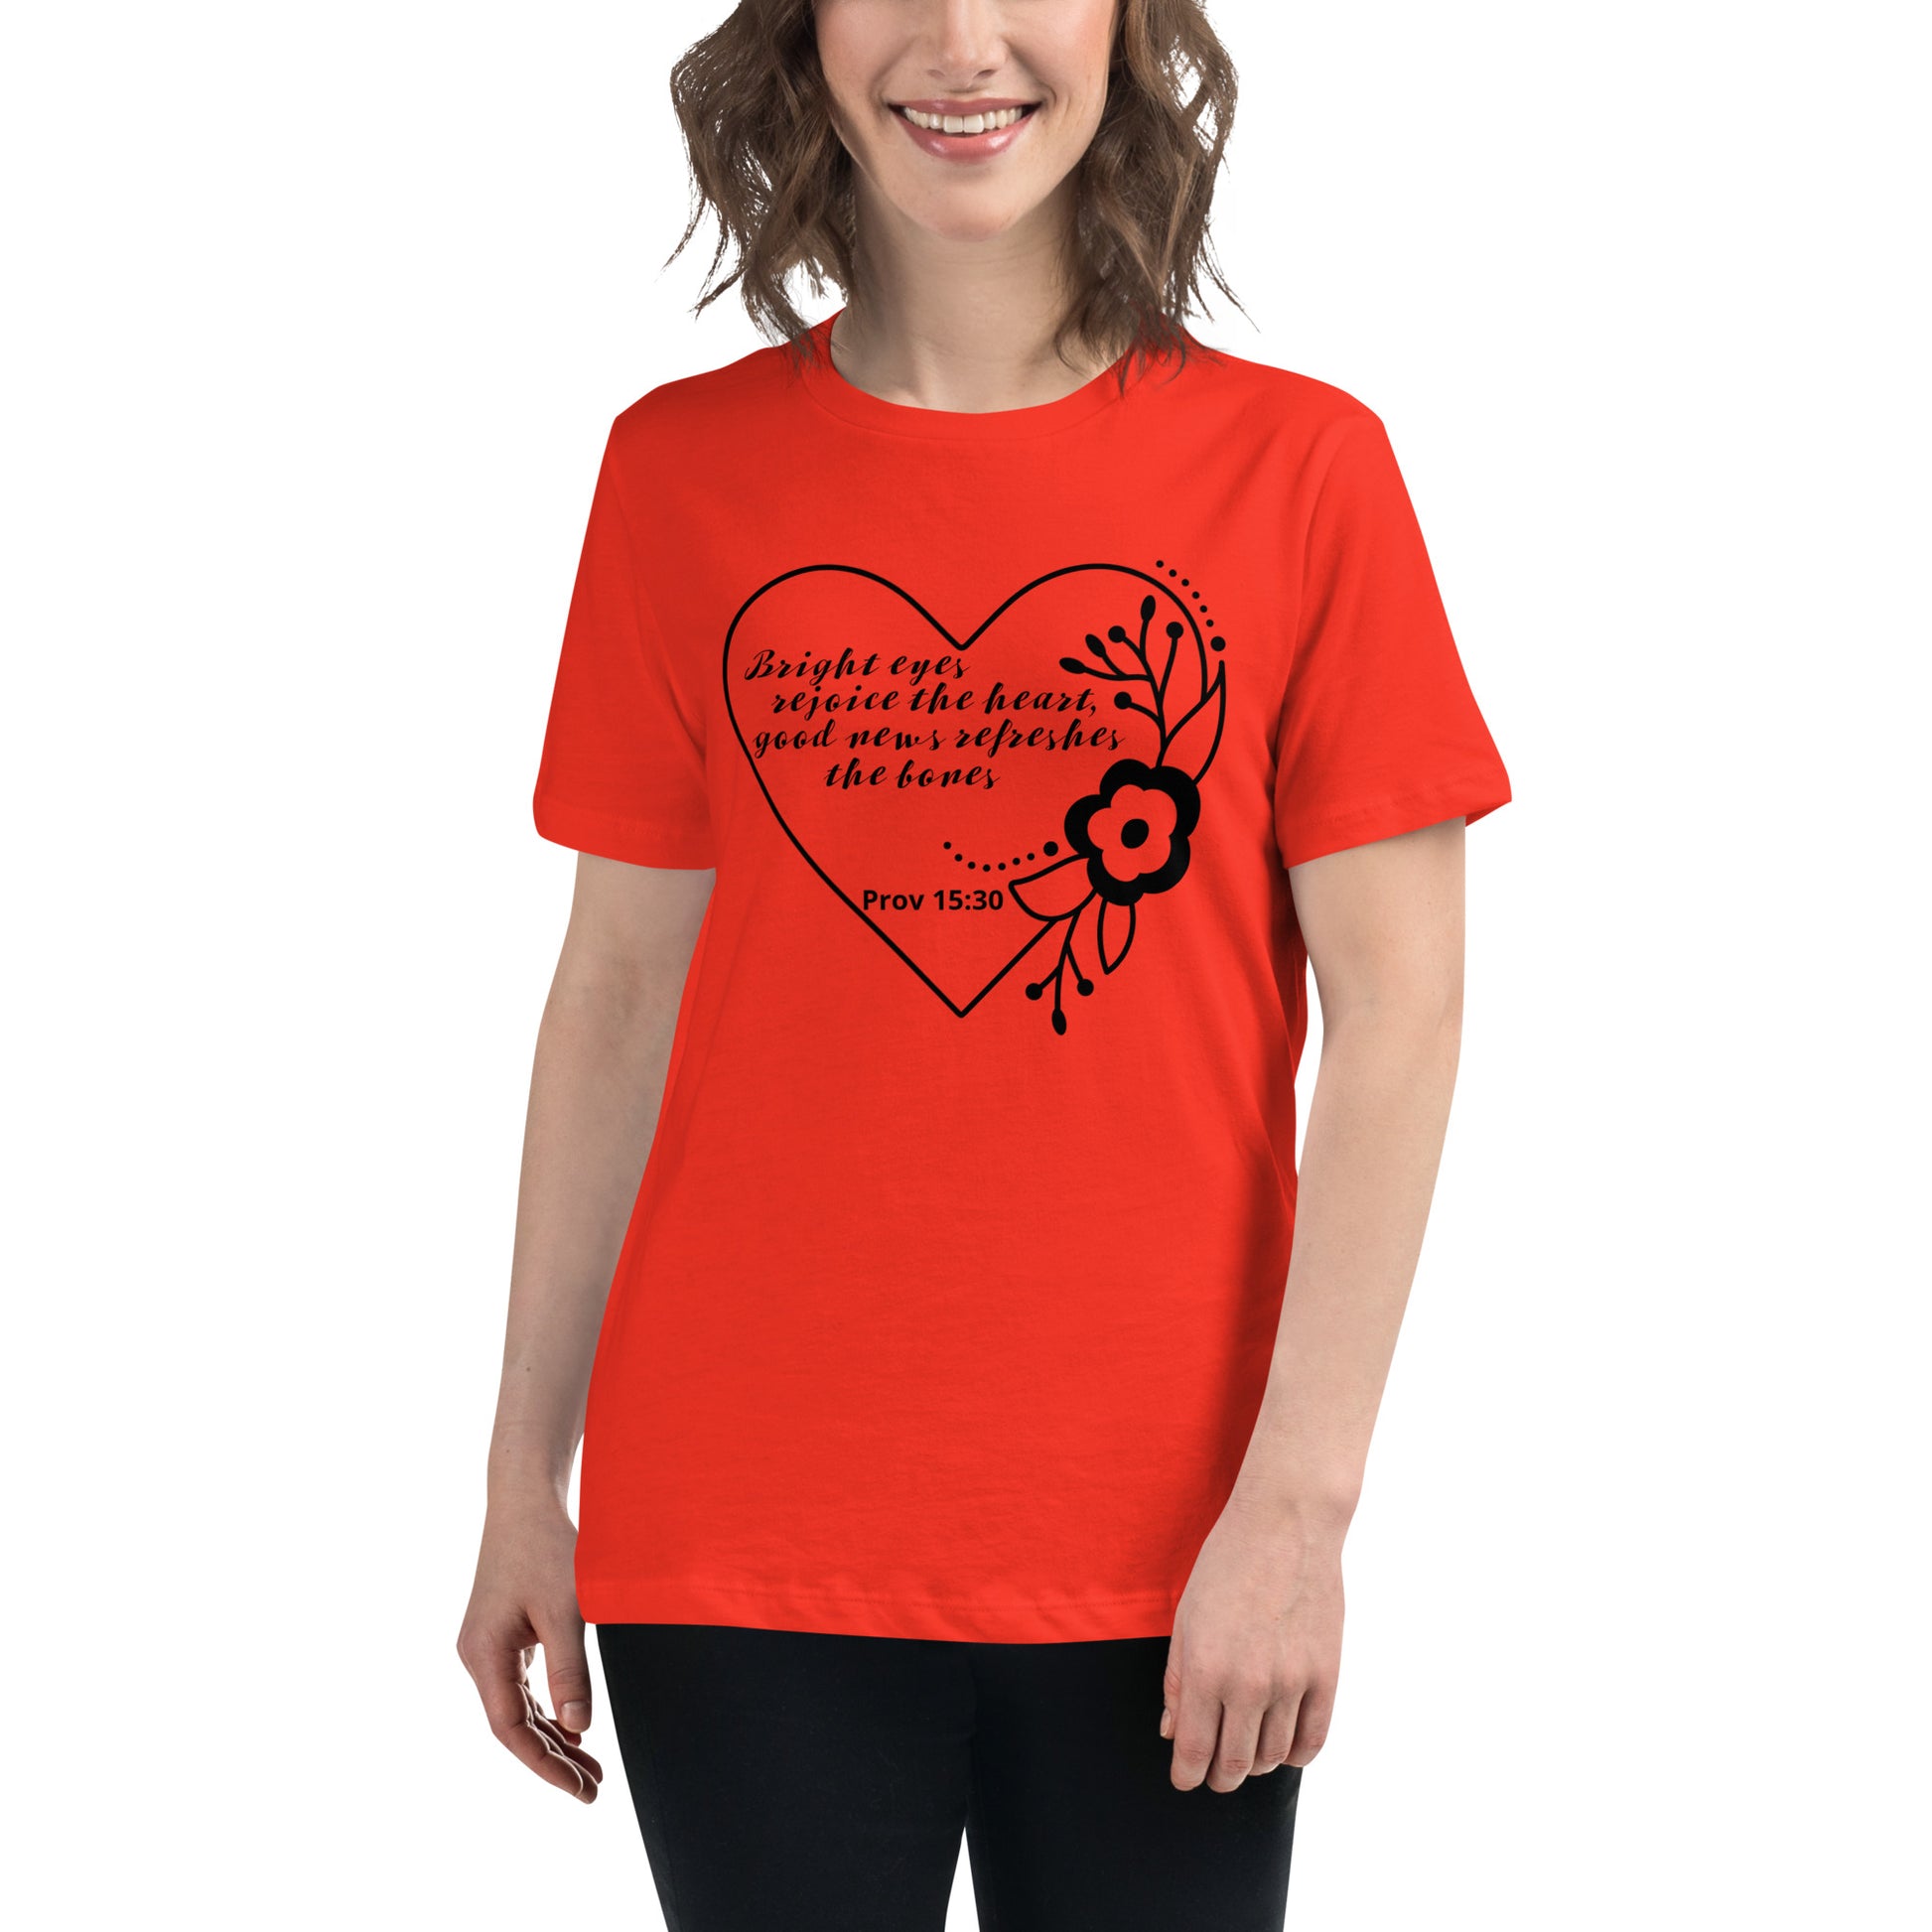 Women's red color christian t shirts